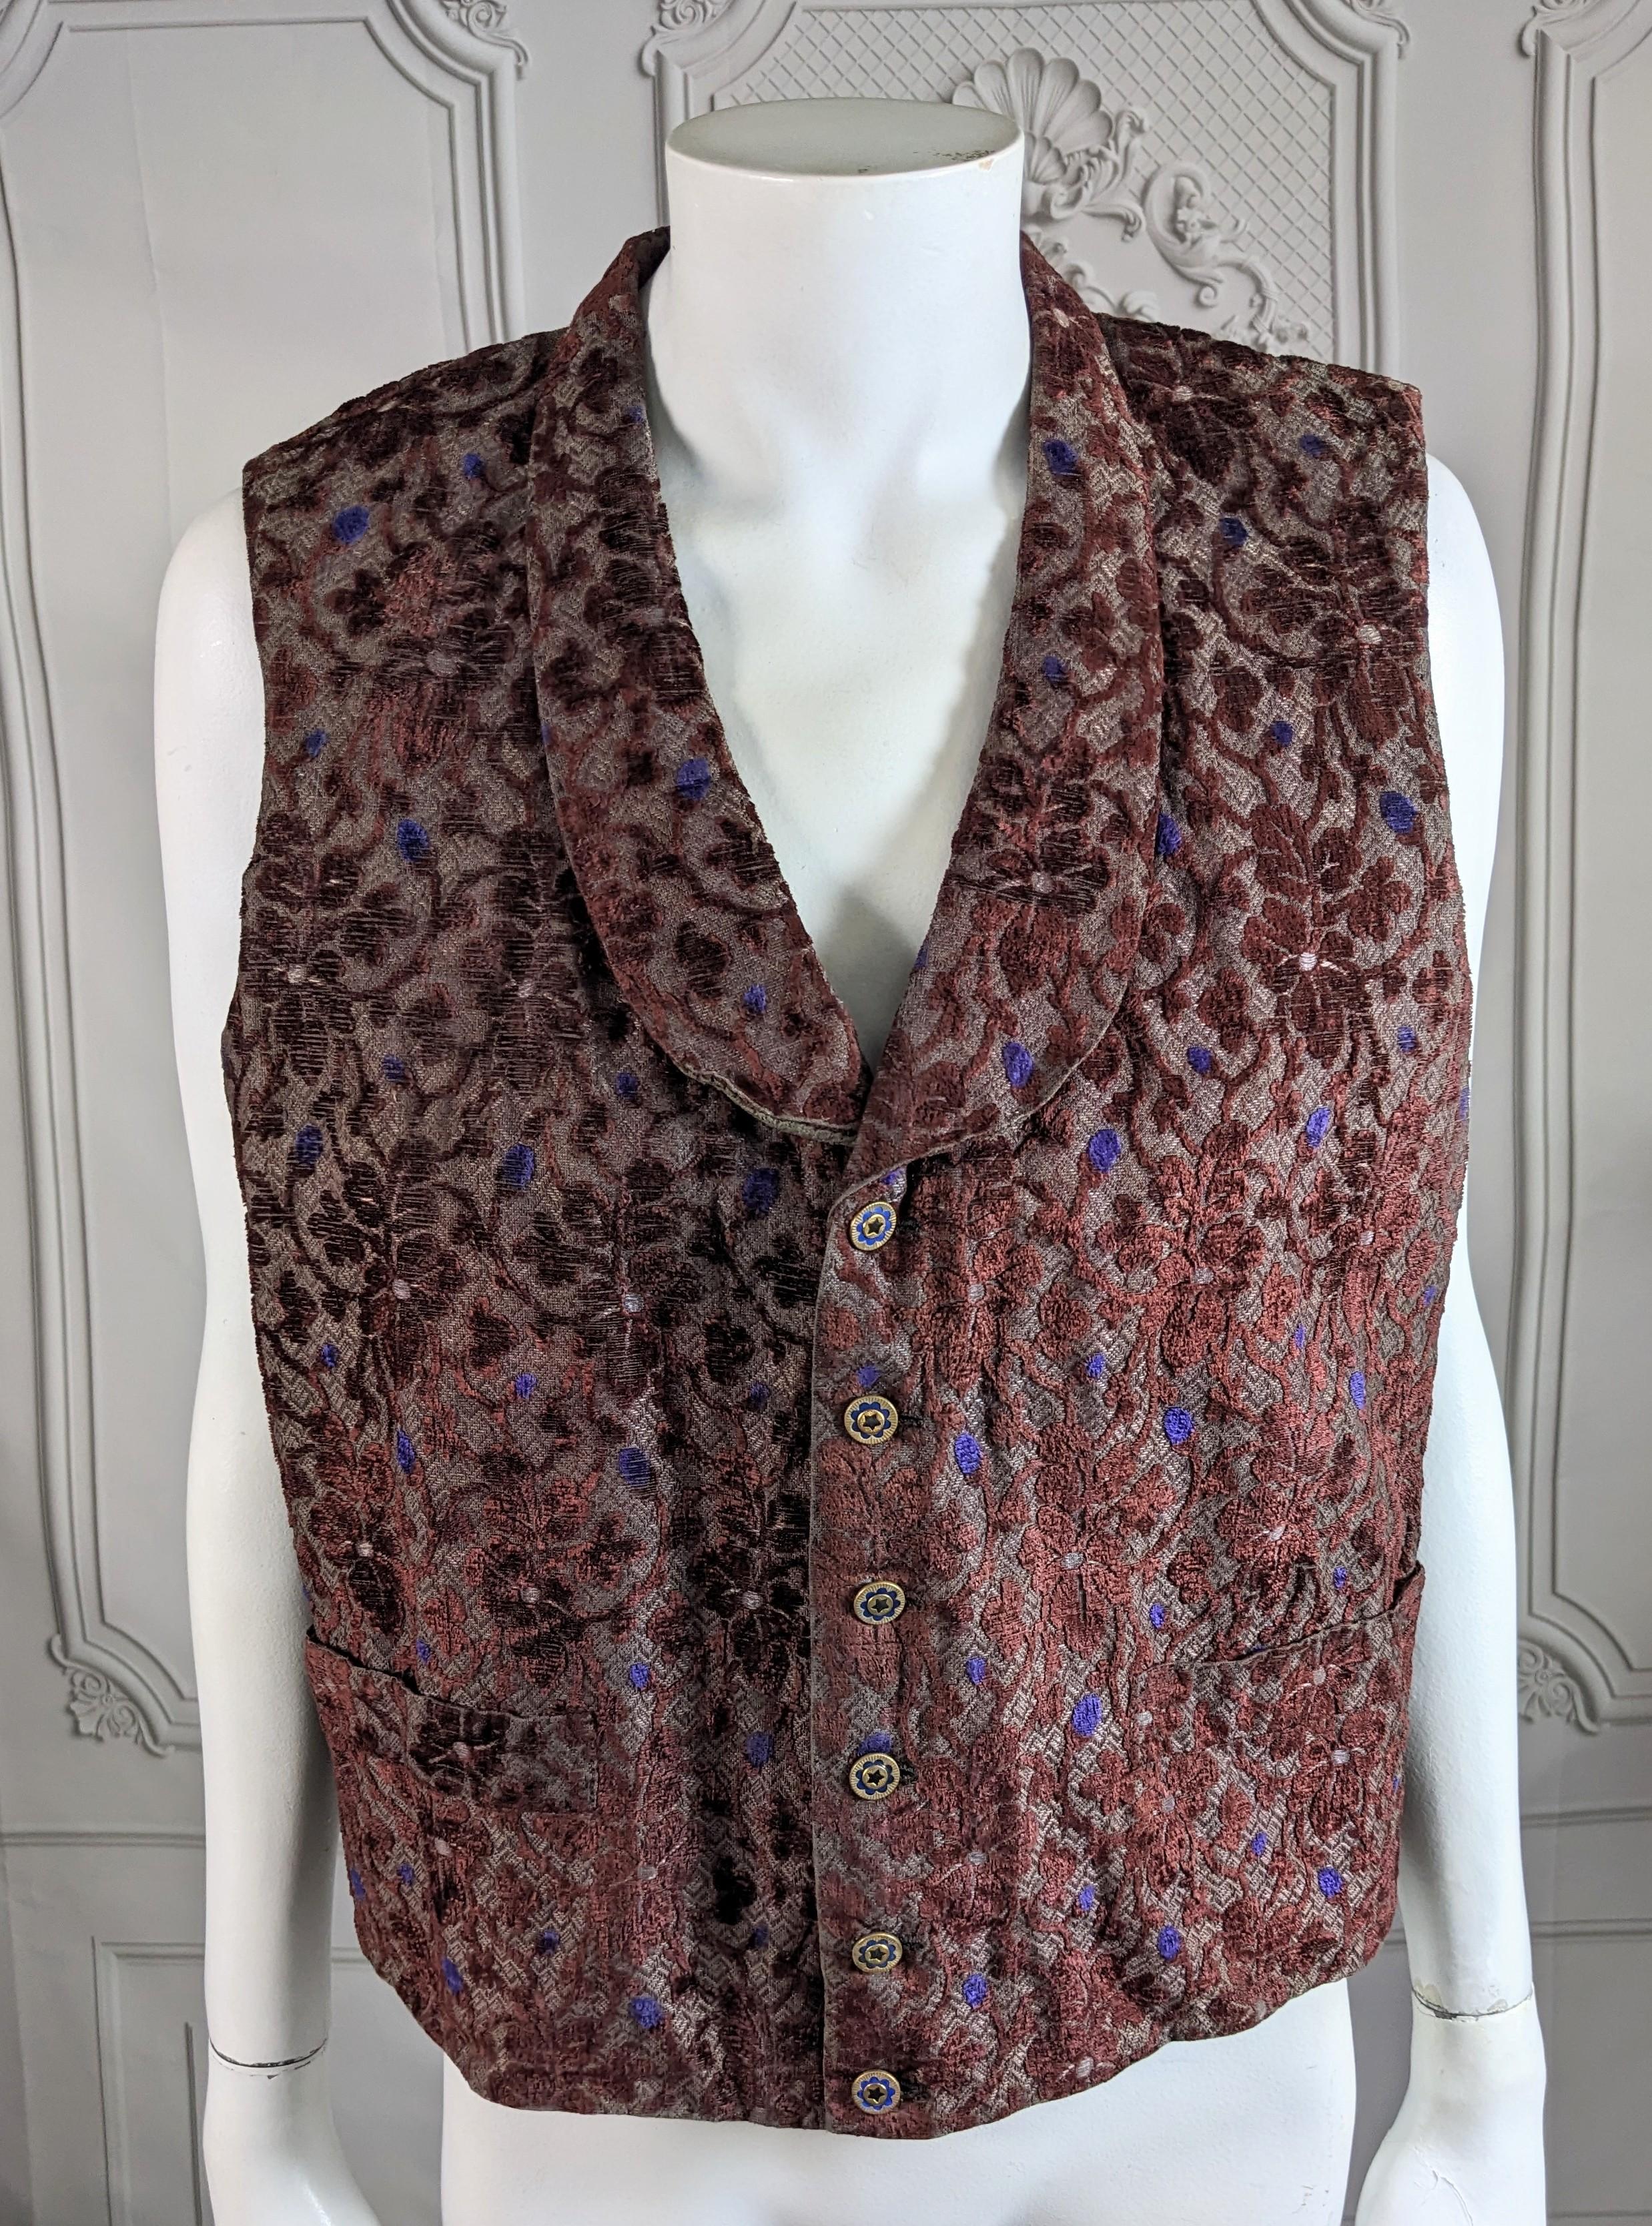 Elegant 19th Century Cut Velvet Brocade Mens Vest circa 1860. Lovely cut velvet textile in deep wine floral with purple blue buds. Enamel buttons with matching blue tones. Lined in cotton flannel and backed in cotton twill. Shawl collar with 2